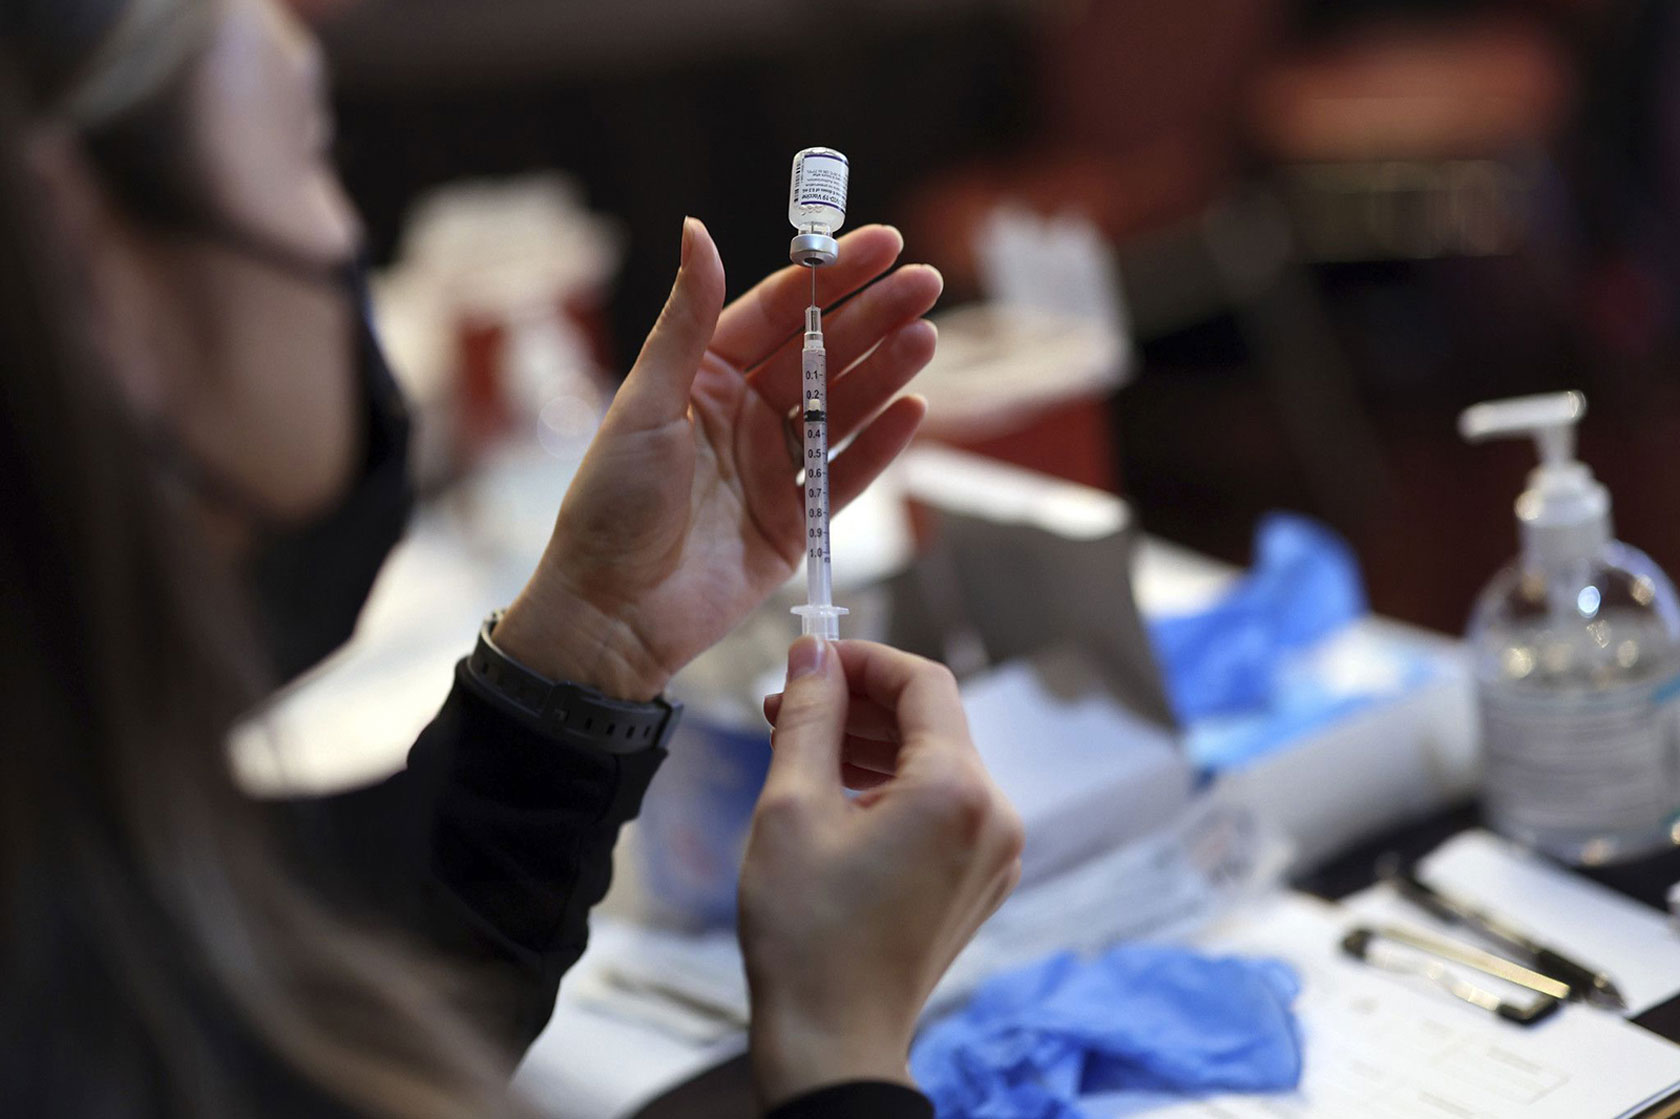 Photo shows a nurse using a syringe to withdraw a dose of the Pfizer vaccine from a vial.